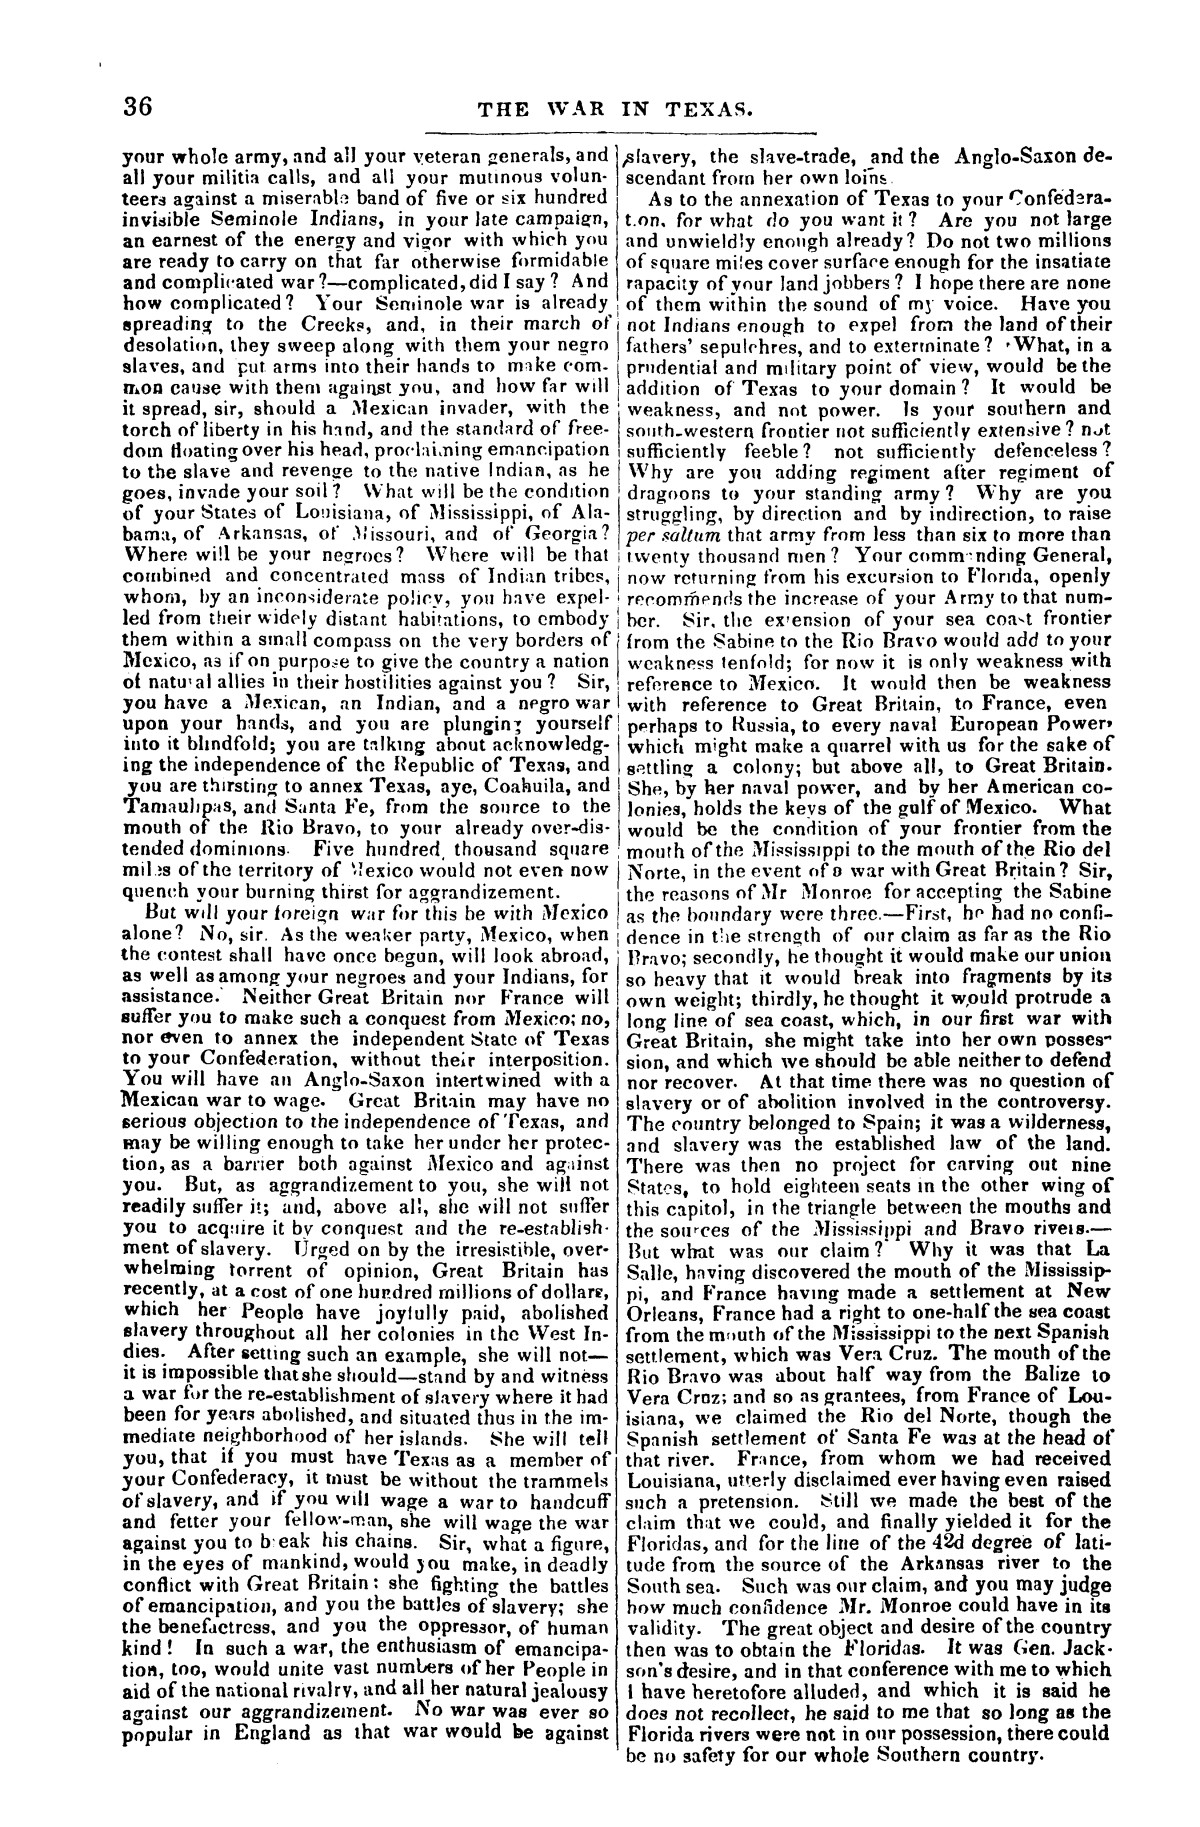 The War in Texas; A Review of Facts and Circumstances, showing that this contest is a Crusade Against Mexico, set on foot by Slaveholders, Land Speculators, &c. In Order to Re-Establish, Extend, and Perpetuate the System of Slavery and the Slave Trade.
                                                
                                                    [Sequence #]: 36 of 64
                                                